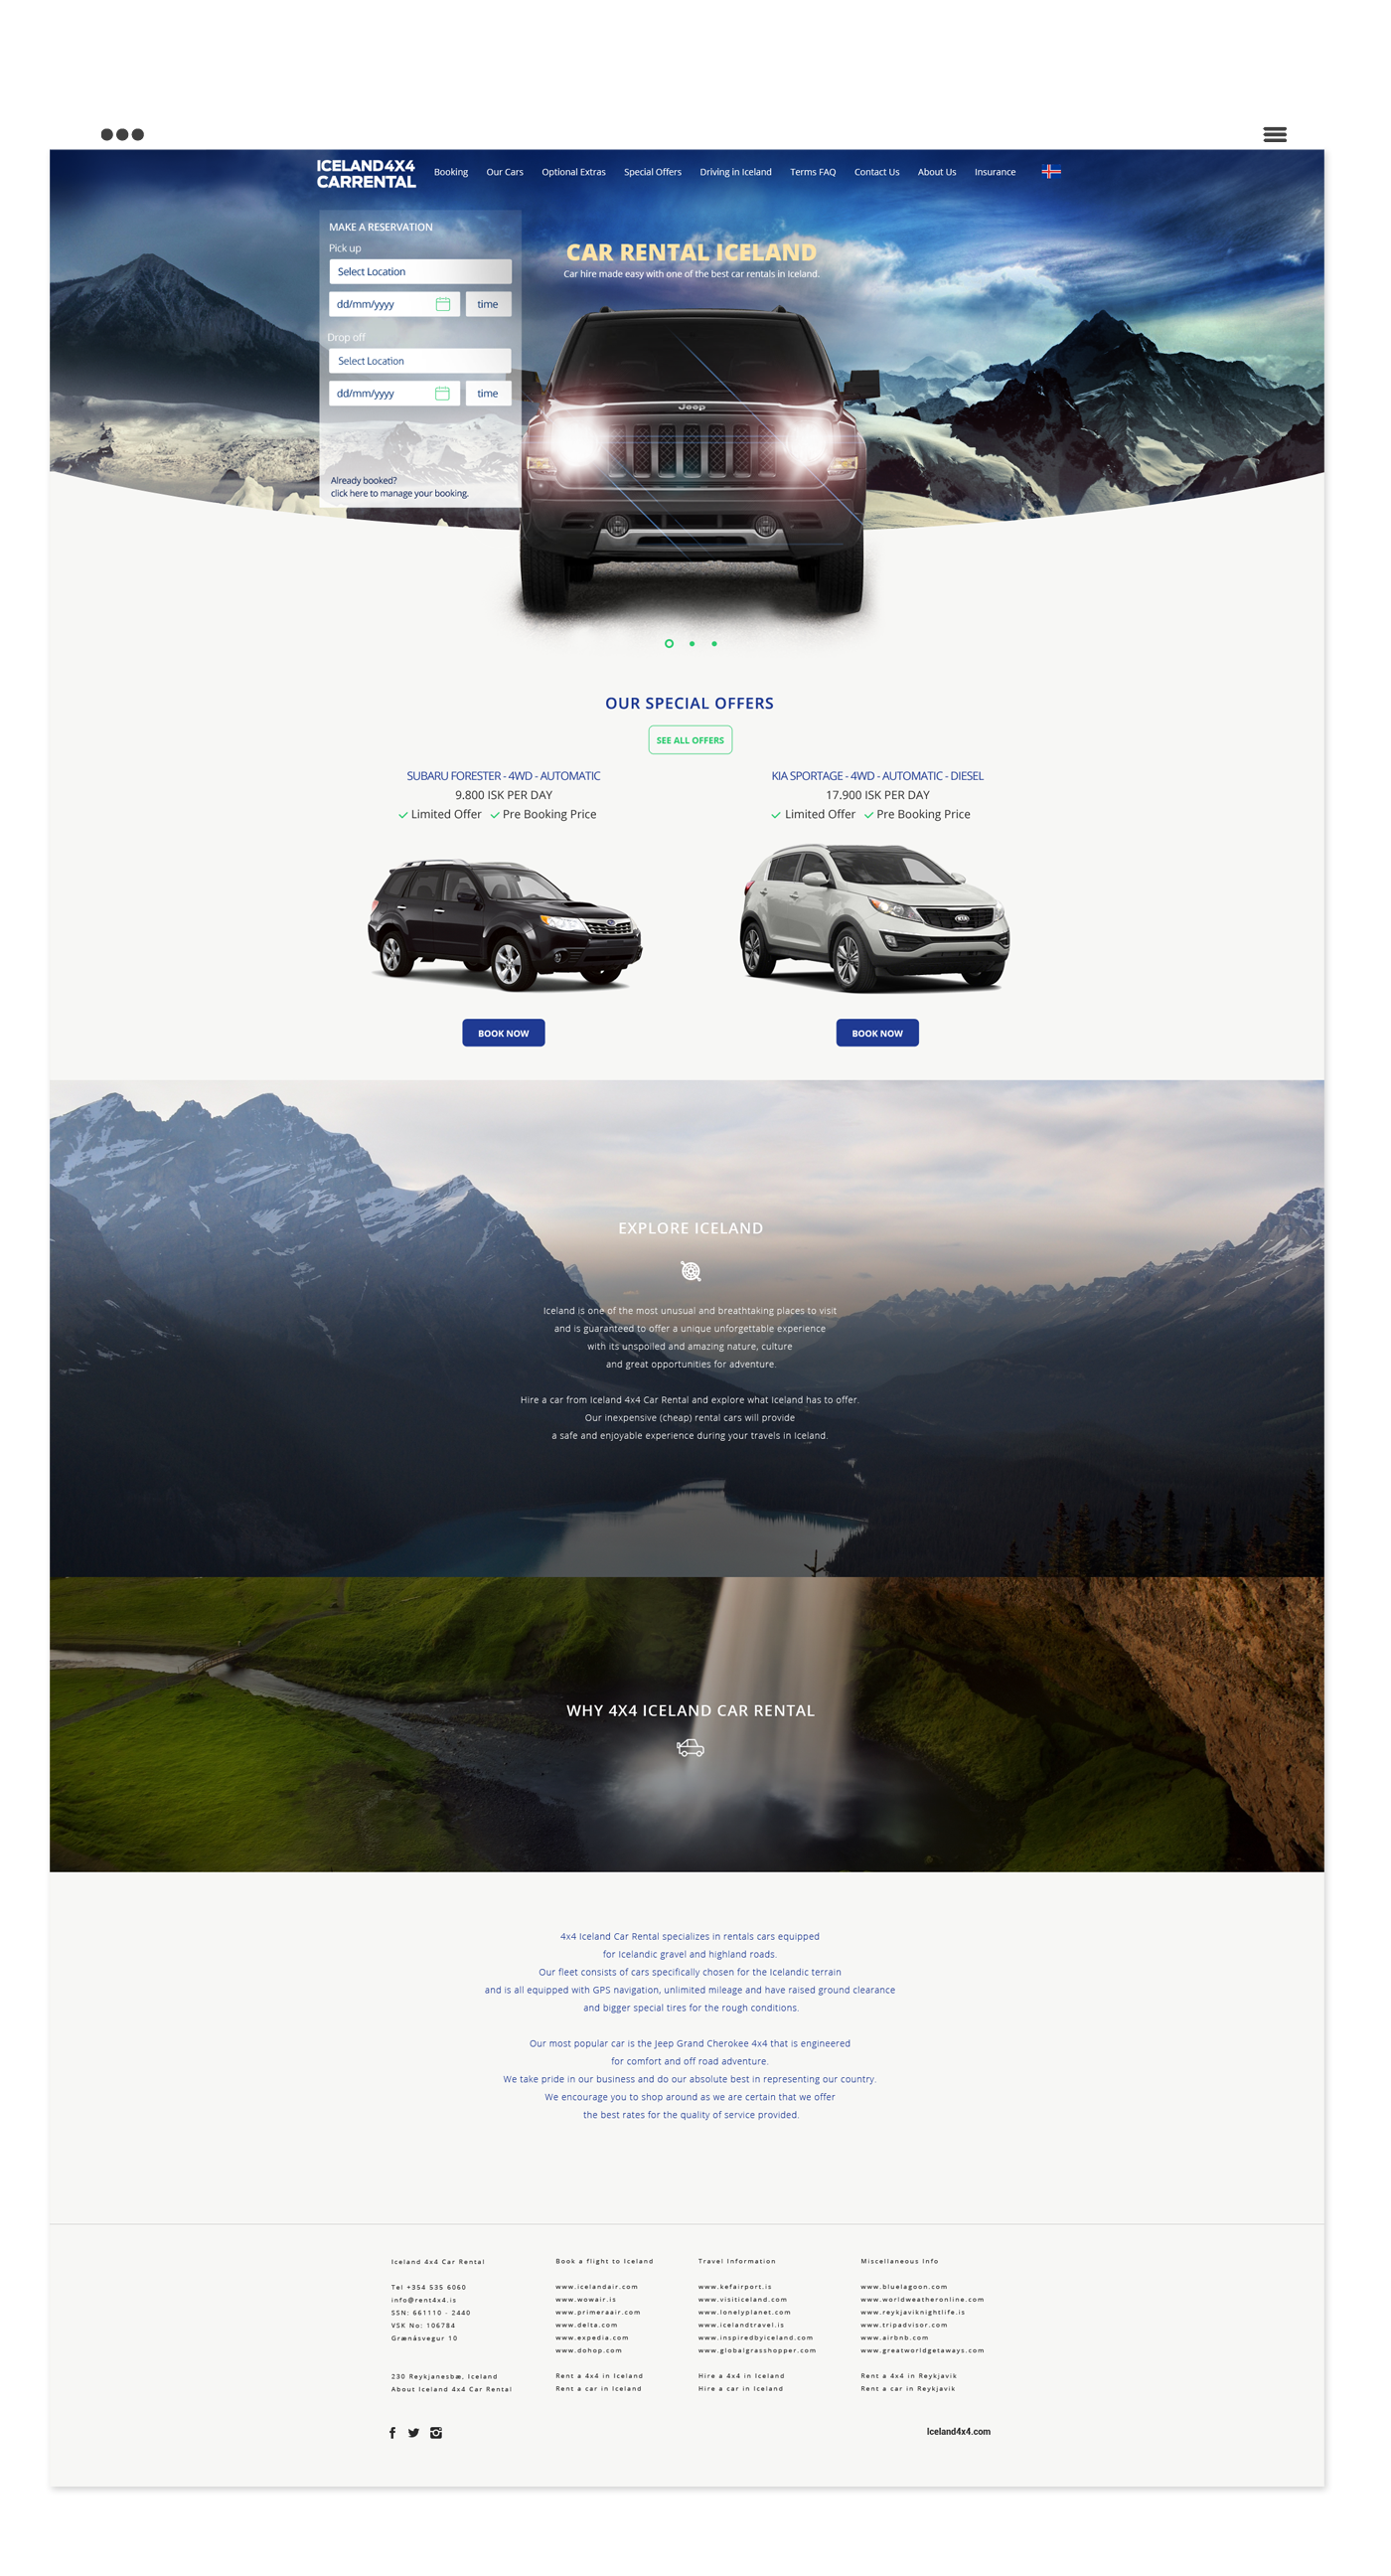 car rental Ecommerce Booking book iceland trip 4x4 jeep